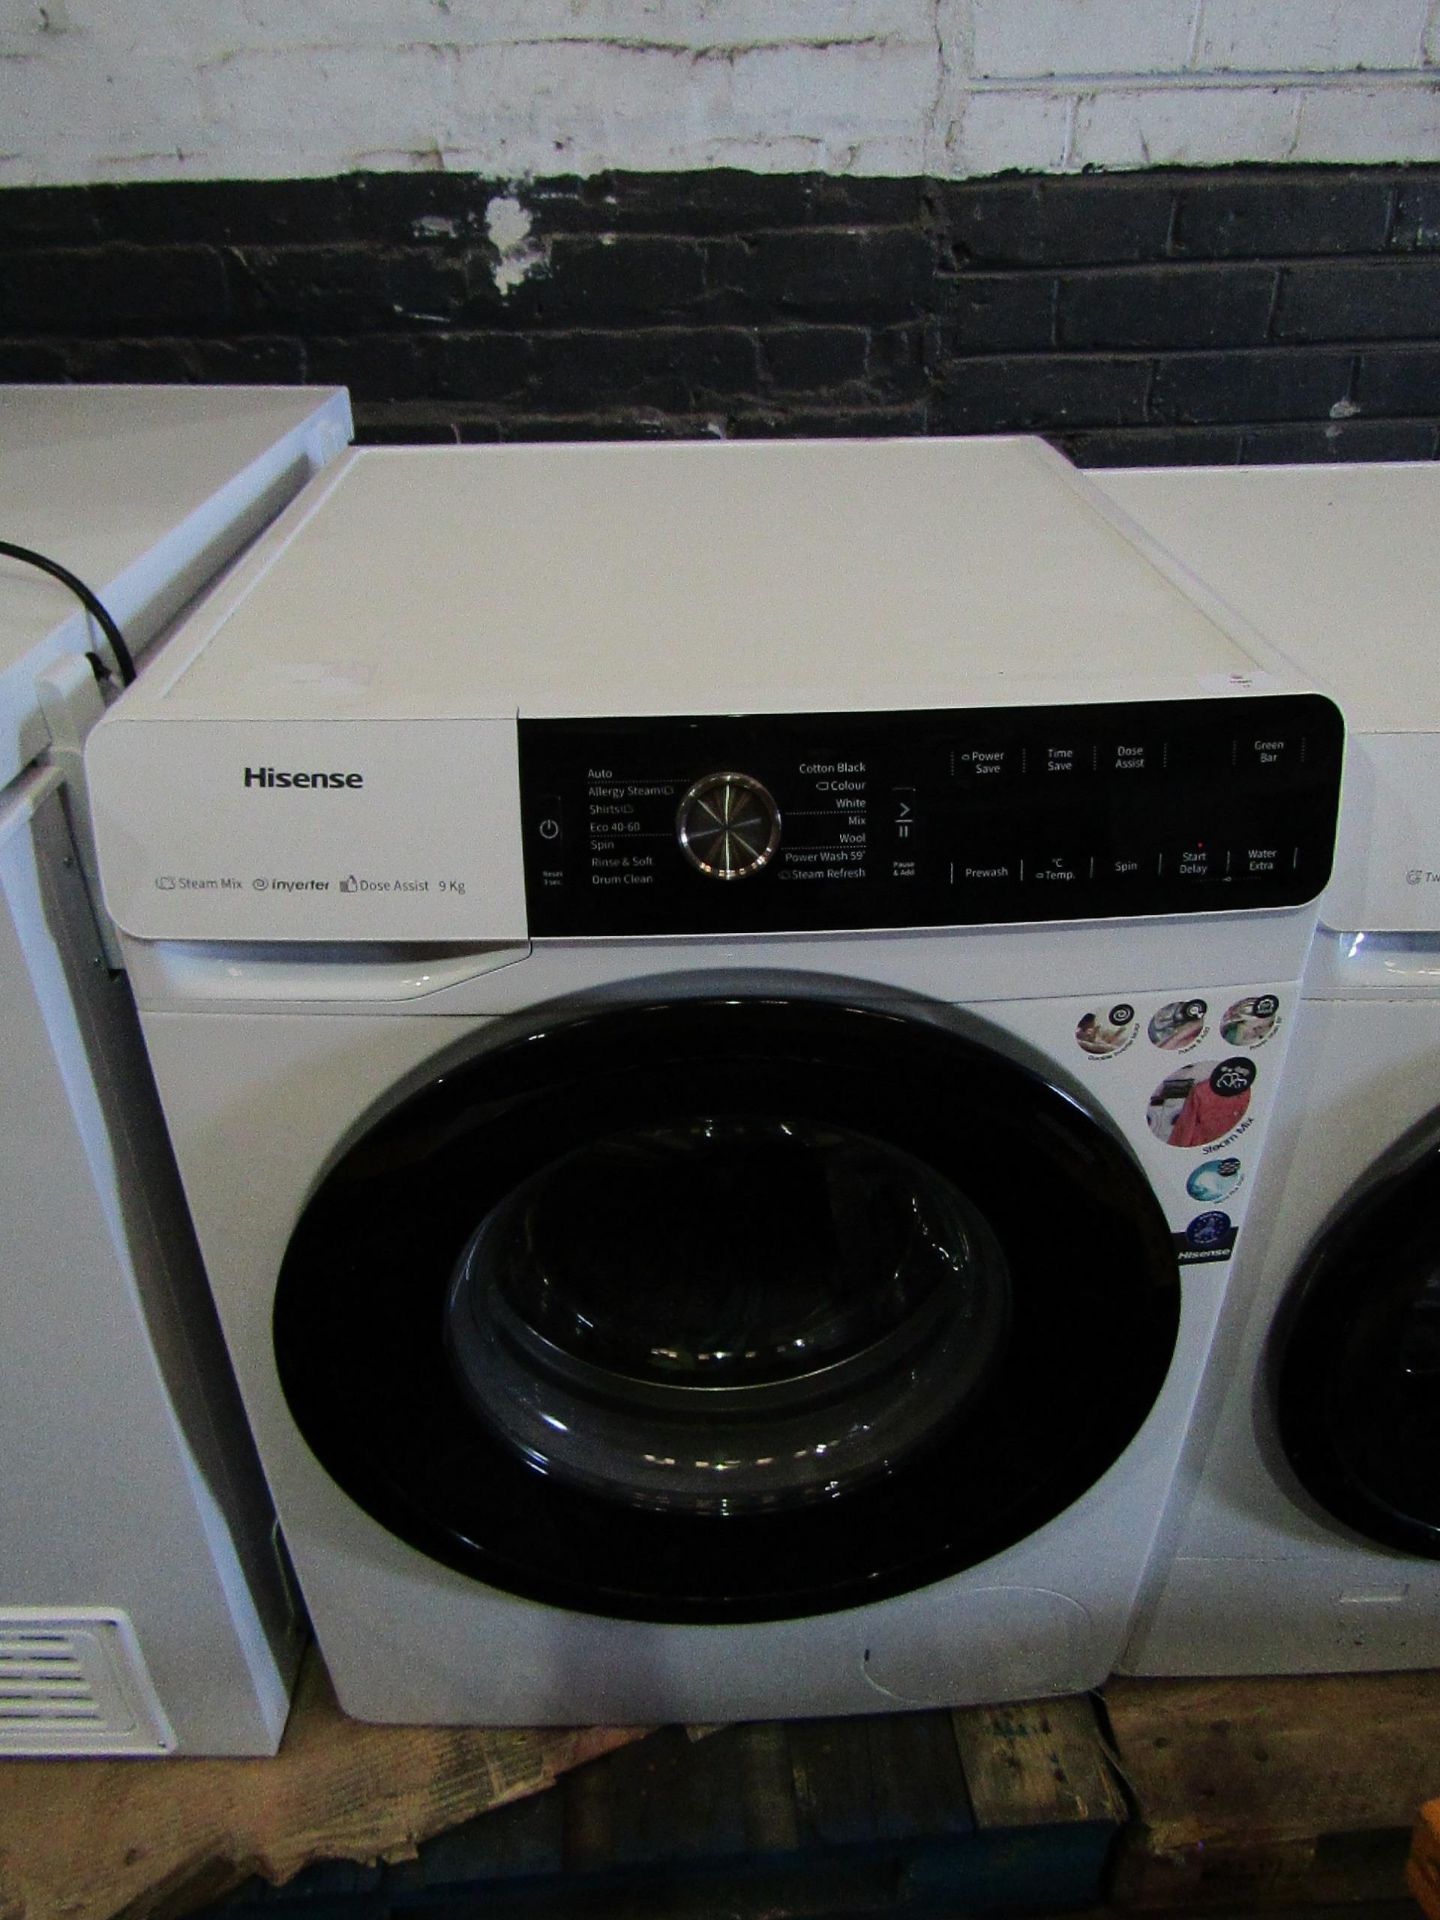 Hisense 9Kg dose Assist steam mix washing machine, powers on and spins, we haven't connected it to